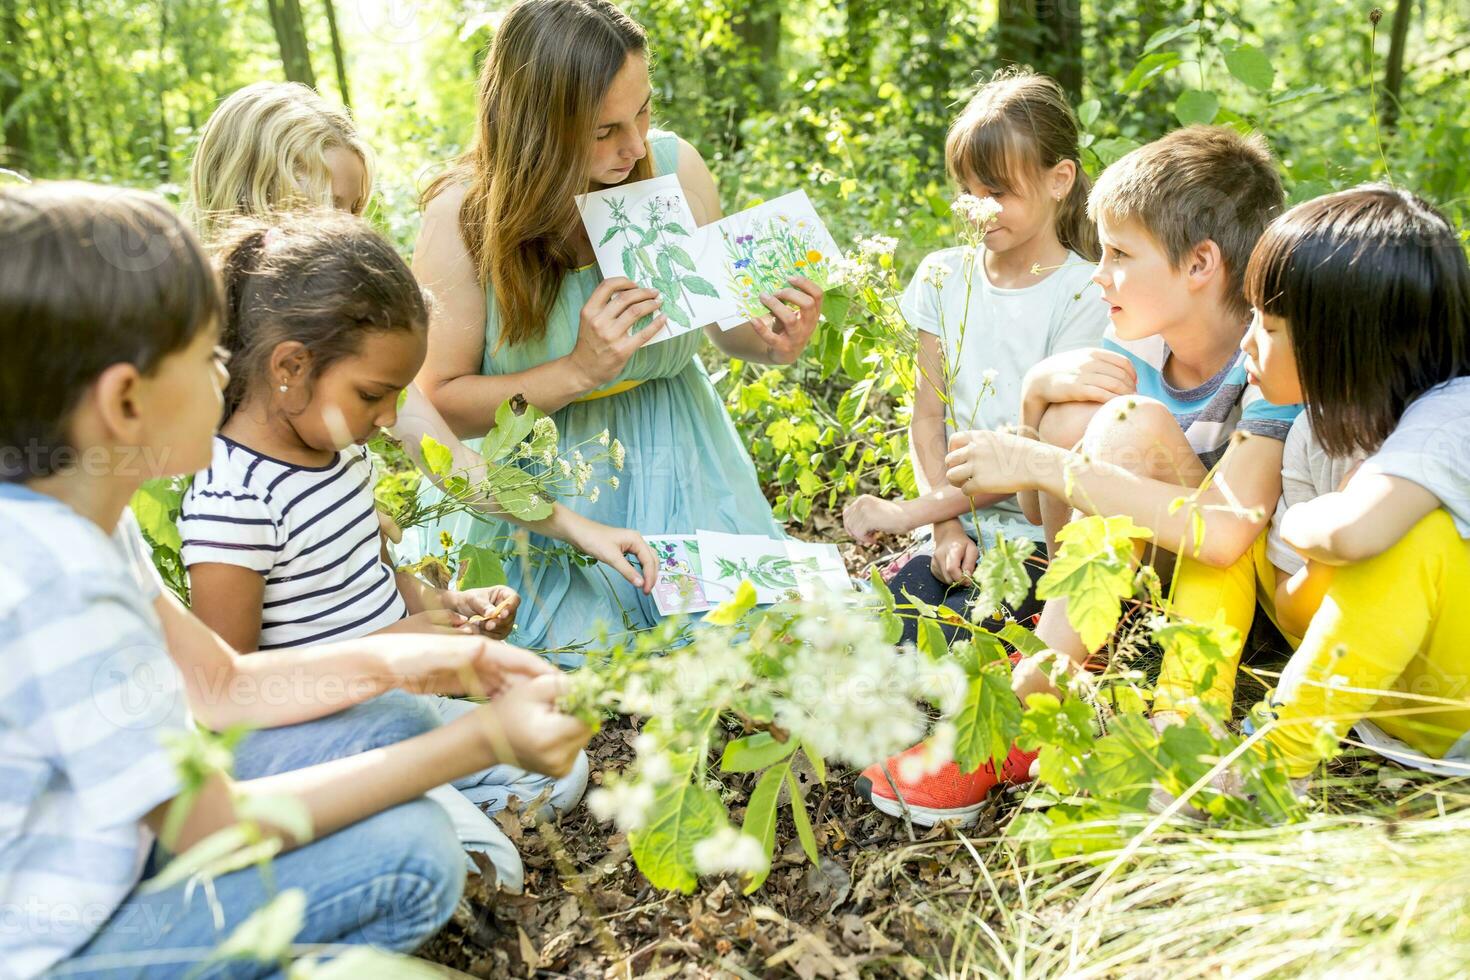 School children learning to recognize plants in nature photo